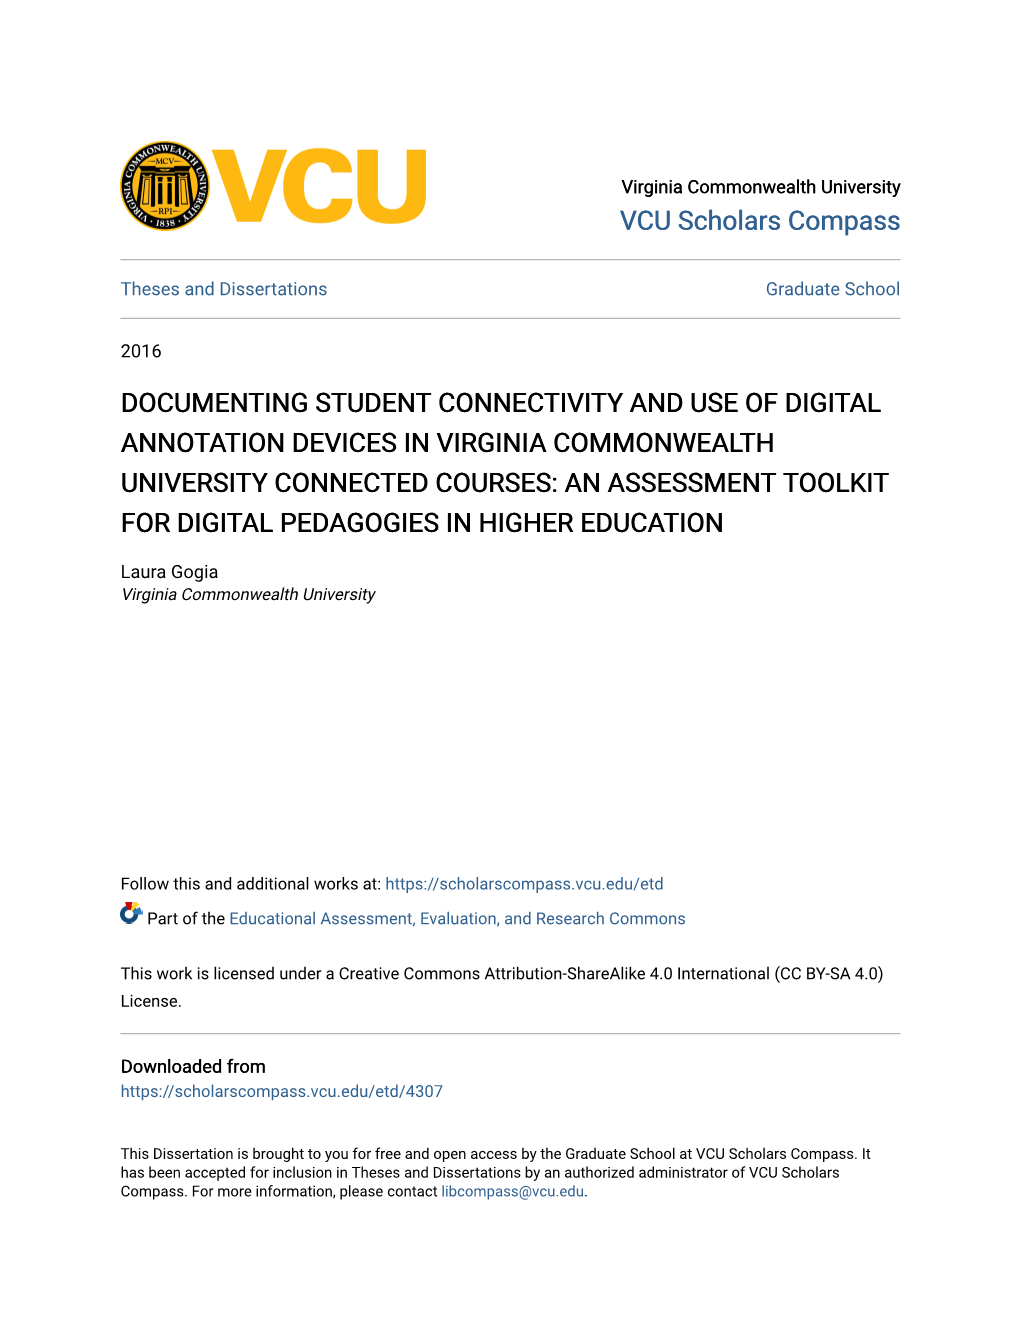 Documenting Student Connectivity and Use Of